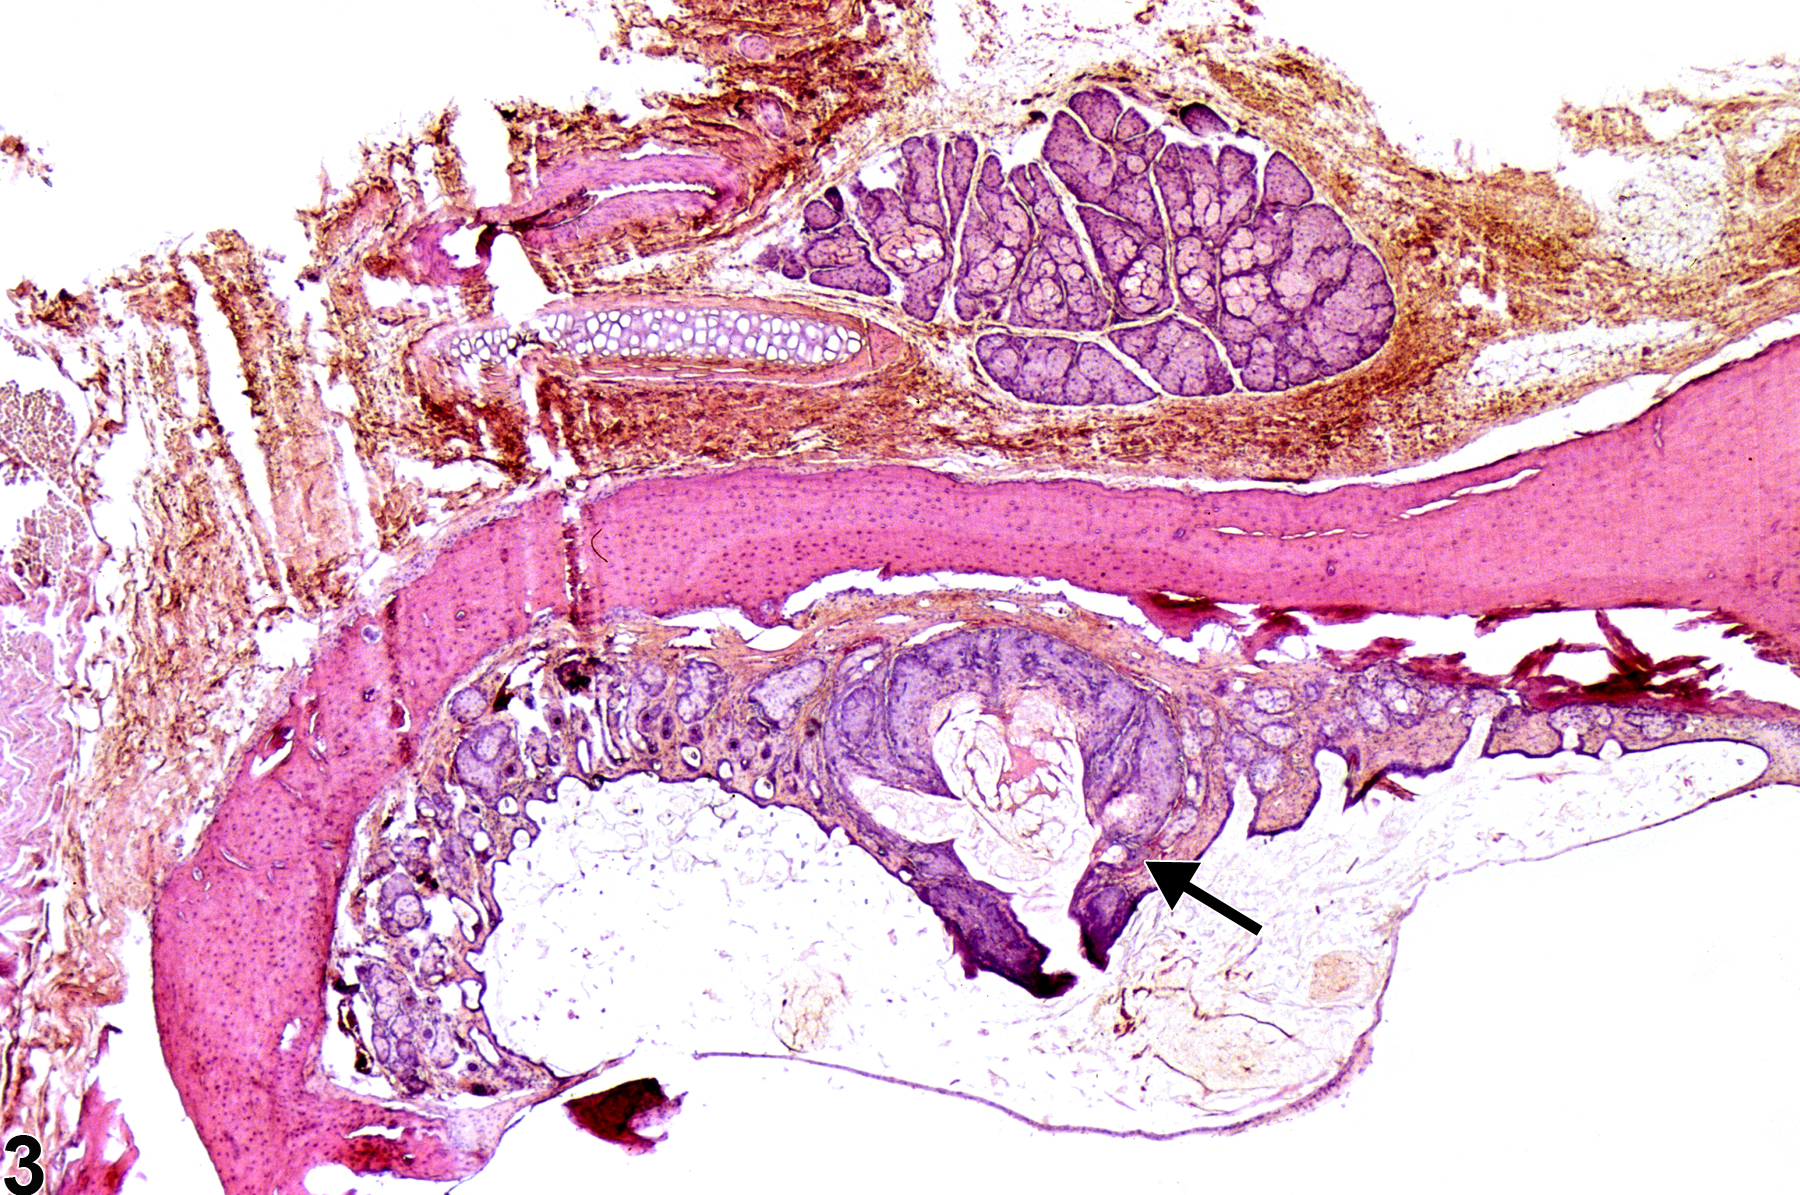 Image of hyperplasia in the Zymbal's gland from a male F344/N rat in a chronic study